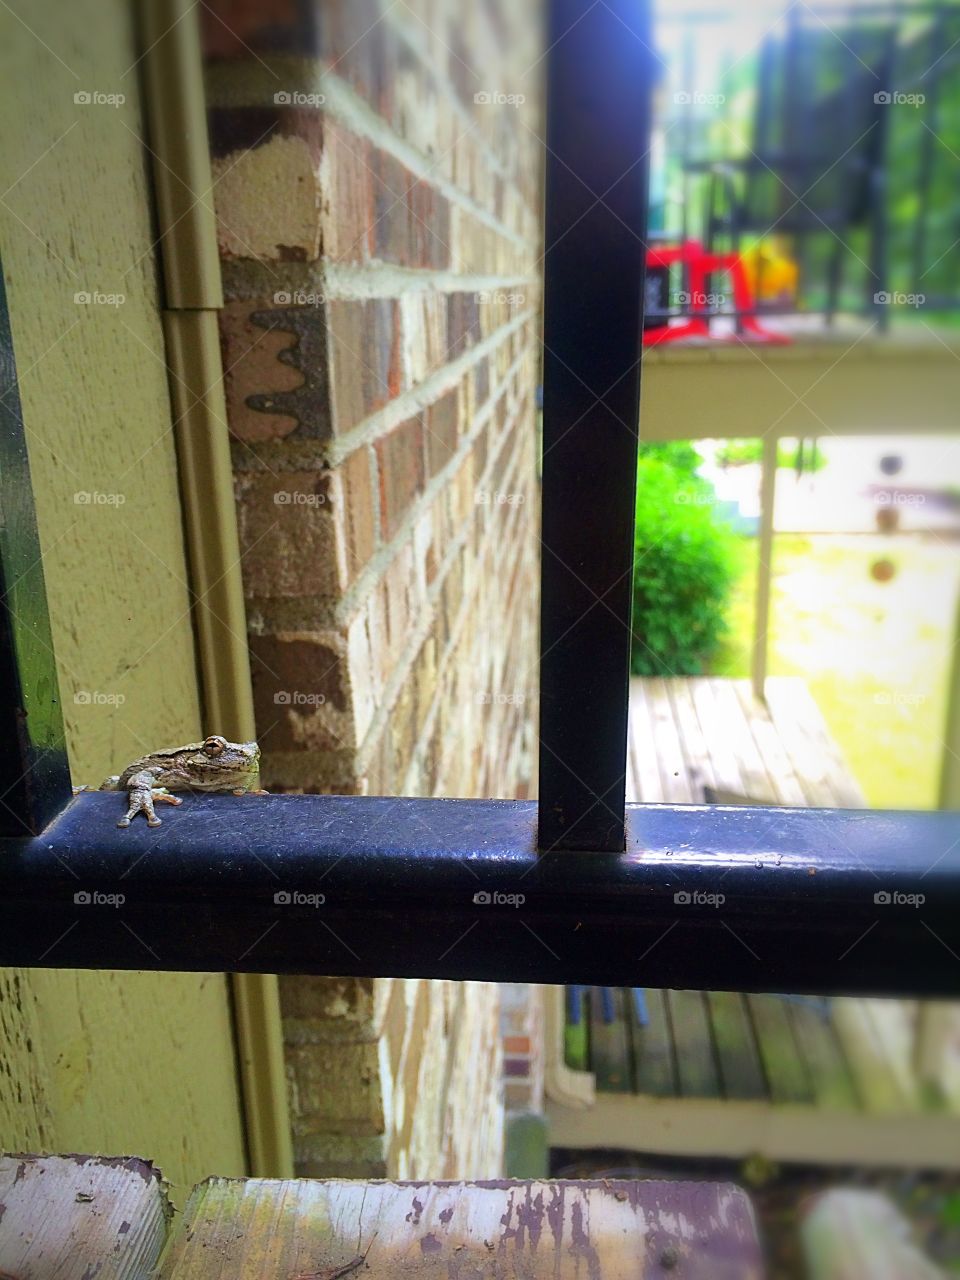 Just hanging out with frog friends.